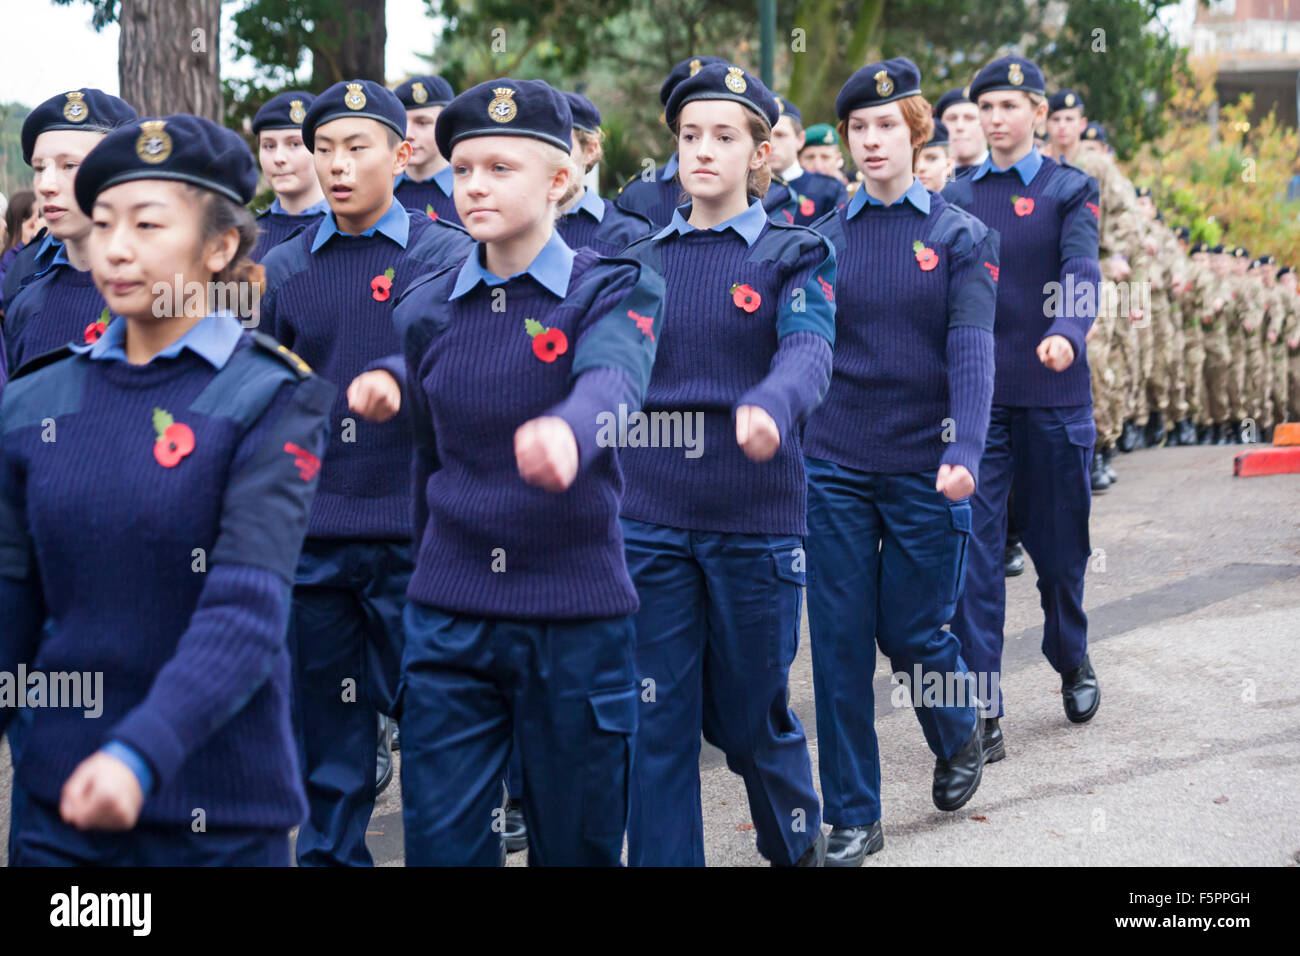 Bournemouth, Dorset UK Sunday 8 November 2015. Remembrance Sunday Parade - representatives of armed services, forces groups and cadets parade through Bournemouth Town, followed by a service and wreath laying at the War Memorial in Central Gardens. Female Air Cadets marching.  Credit:  Carolyn Jenkins/Alamy Live News Stock Photo